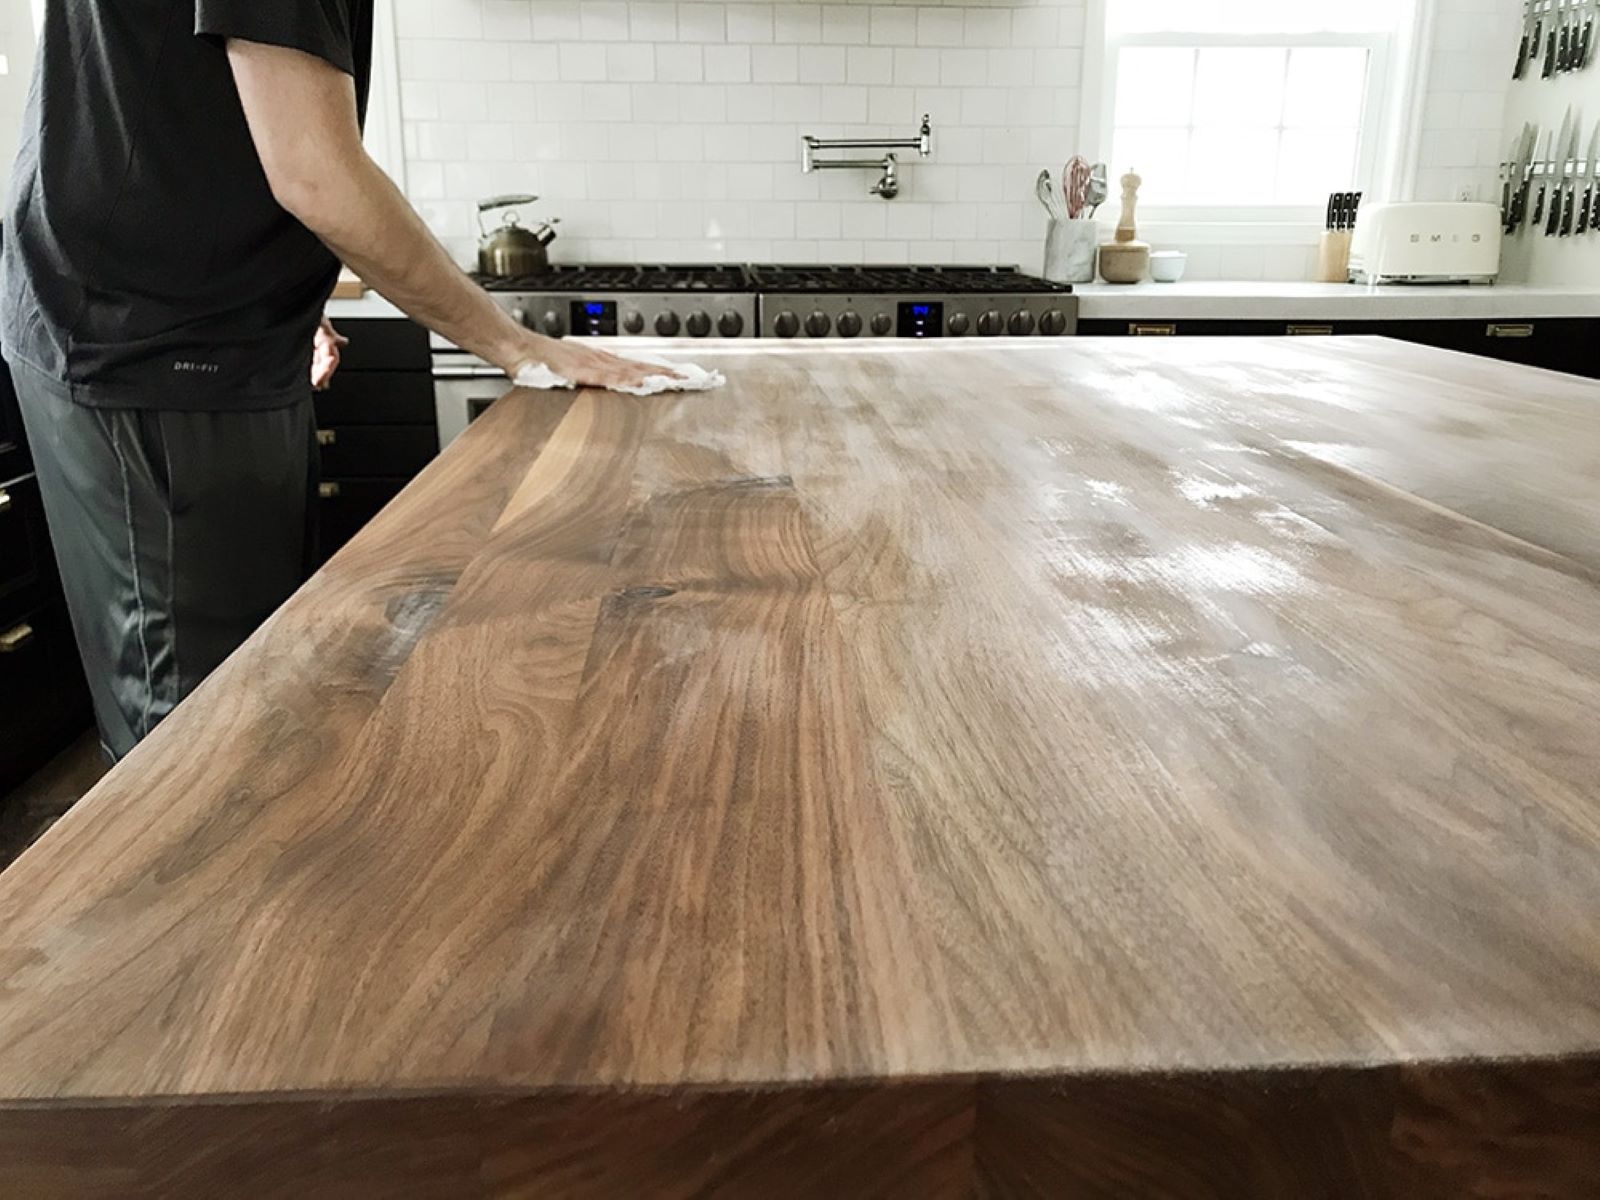 What Do You Finish Butcher Block Countertops With